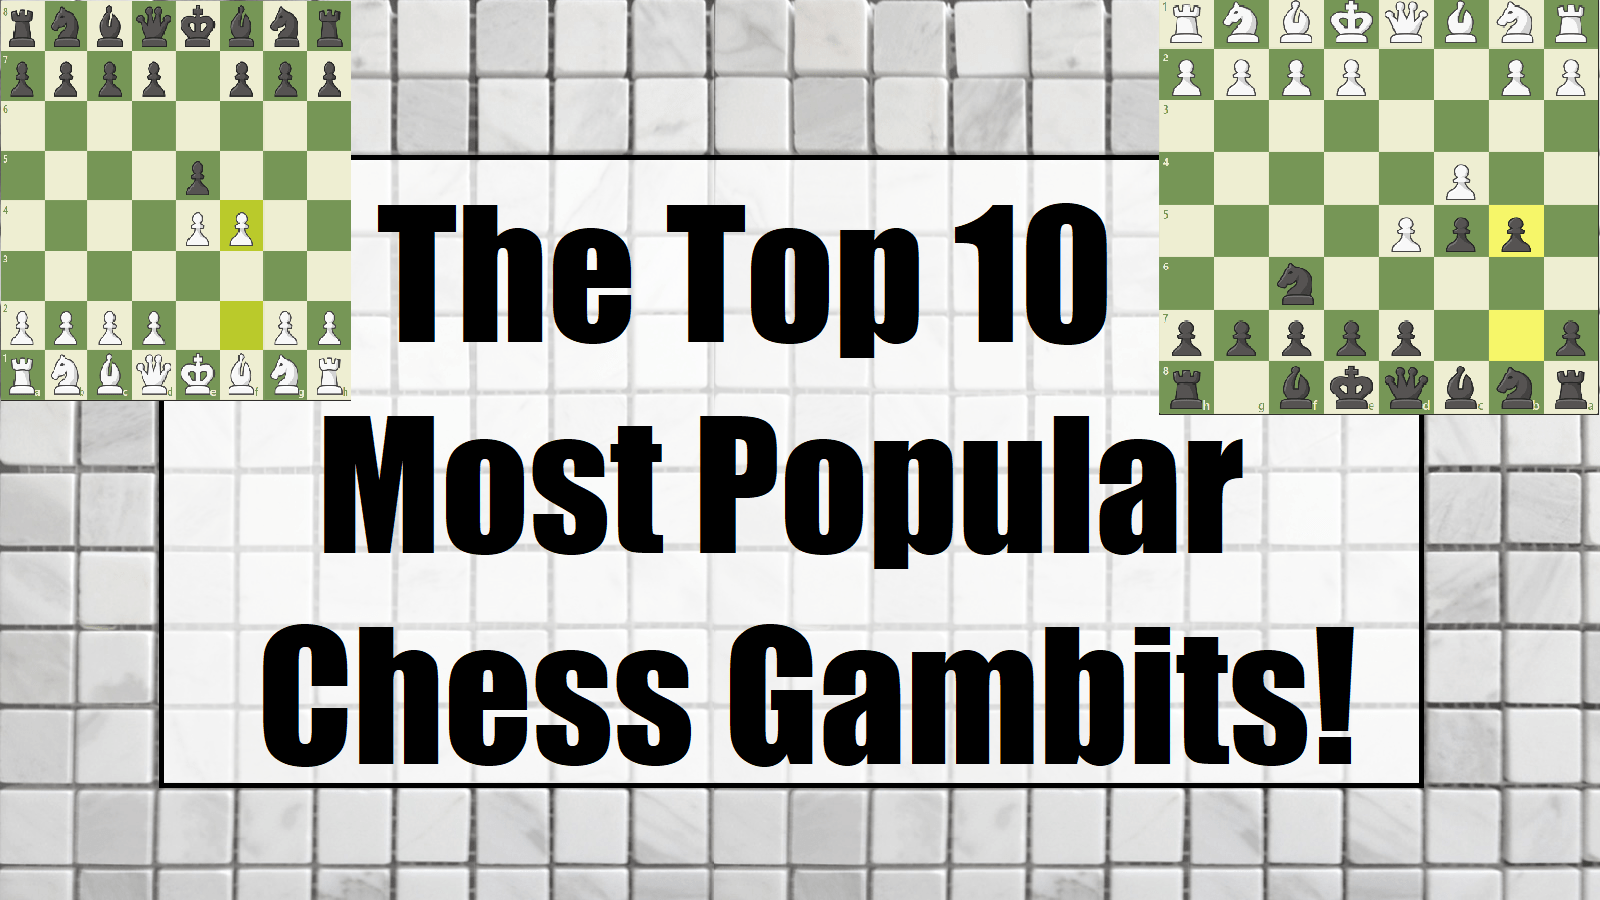 The Top 10 Most Popular Chess Gambits (as voted by you!) 